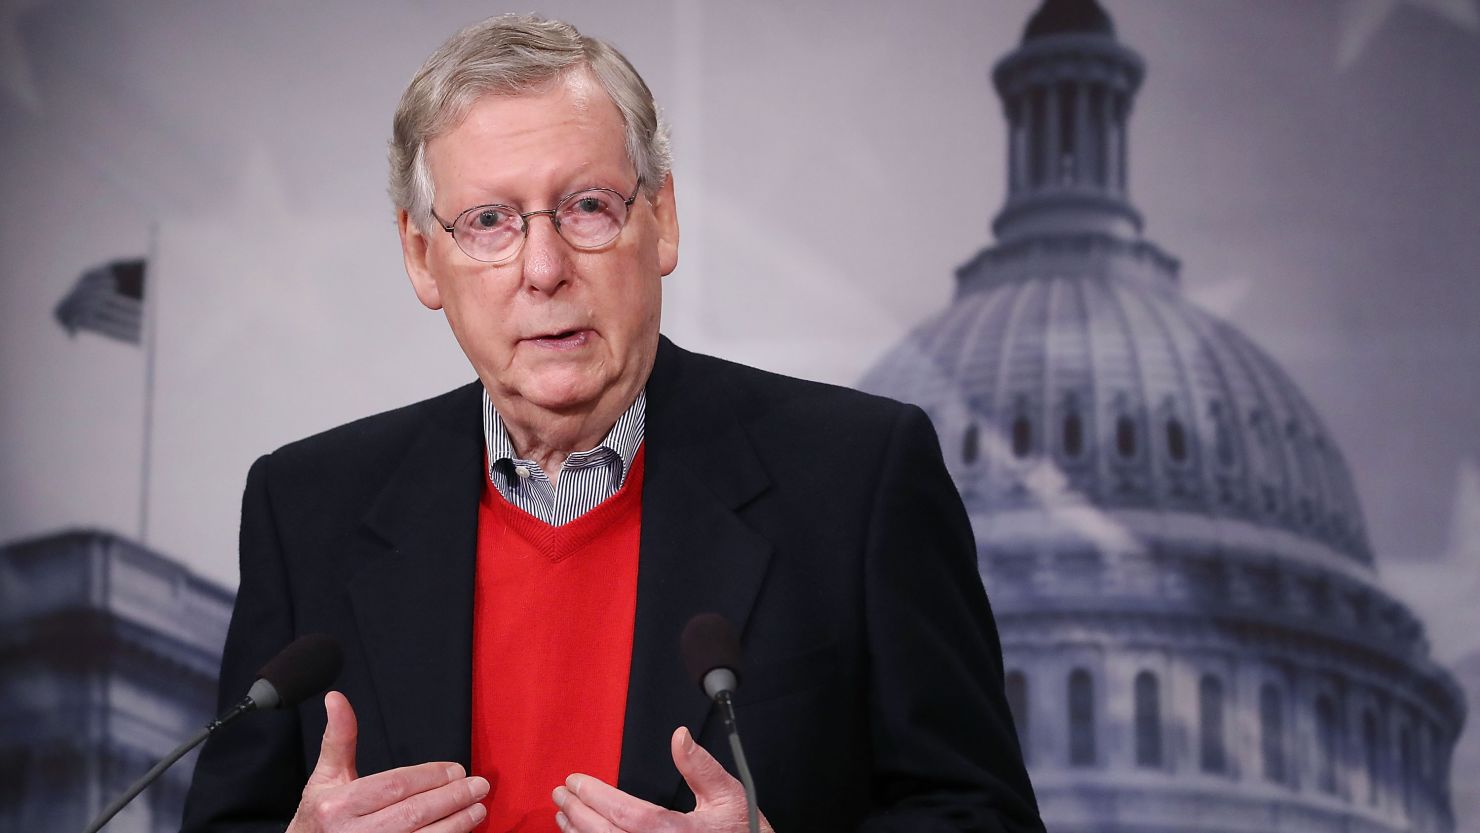 Mitch McConnell, who has led Senate Republicans for a decade, may be one of the most disciplined politicians in America.